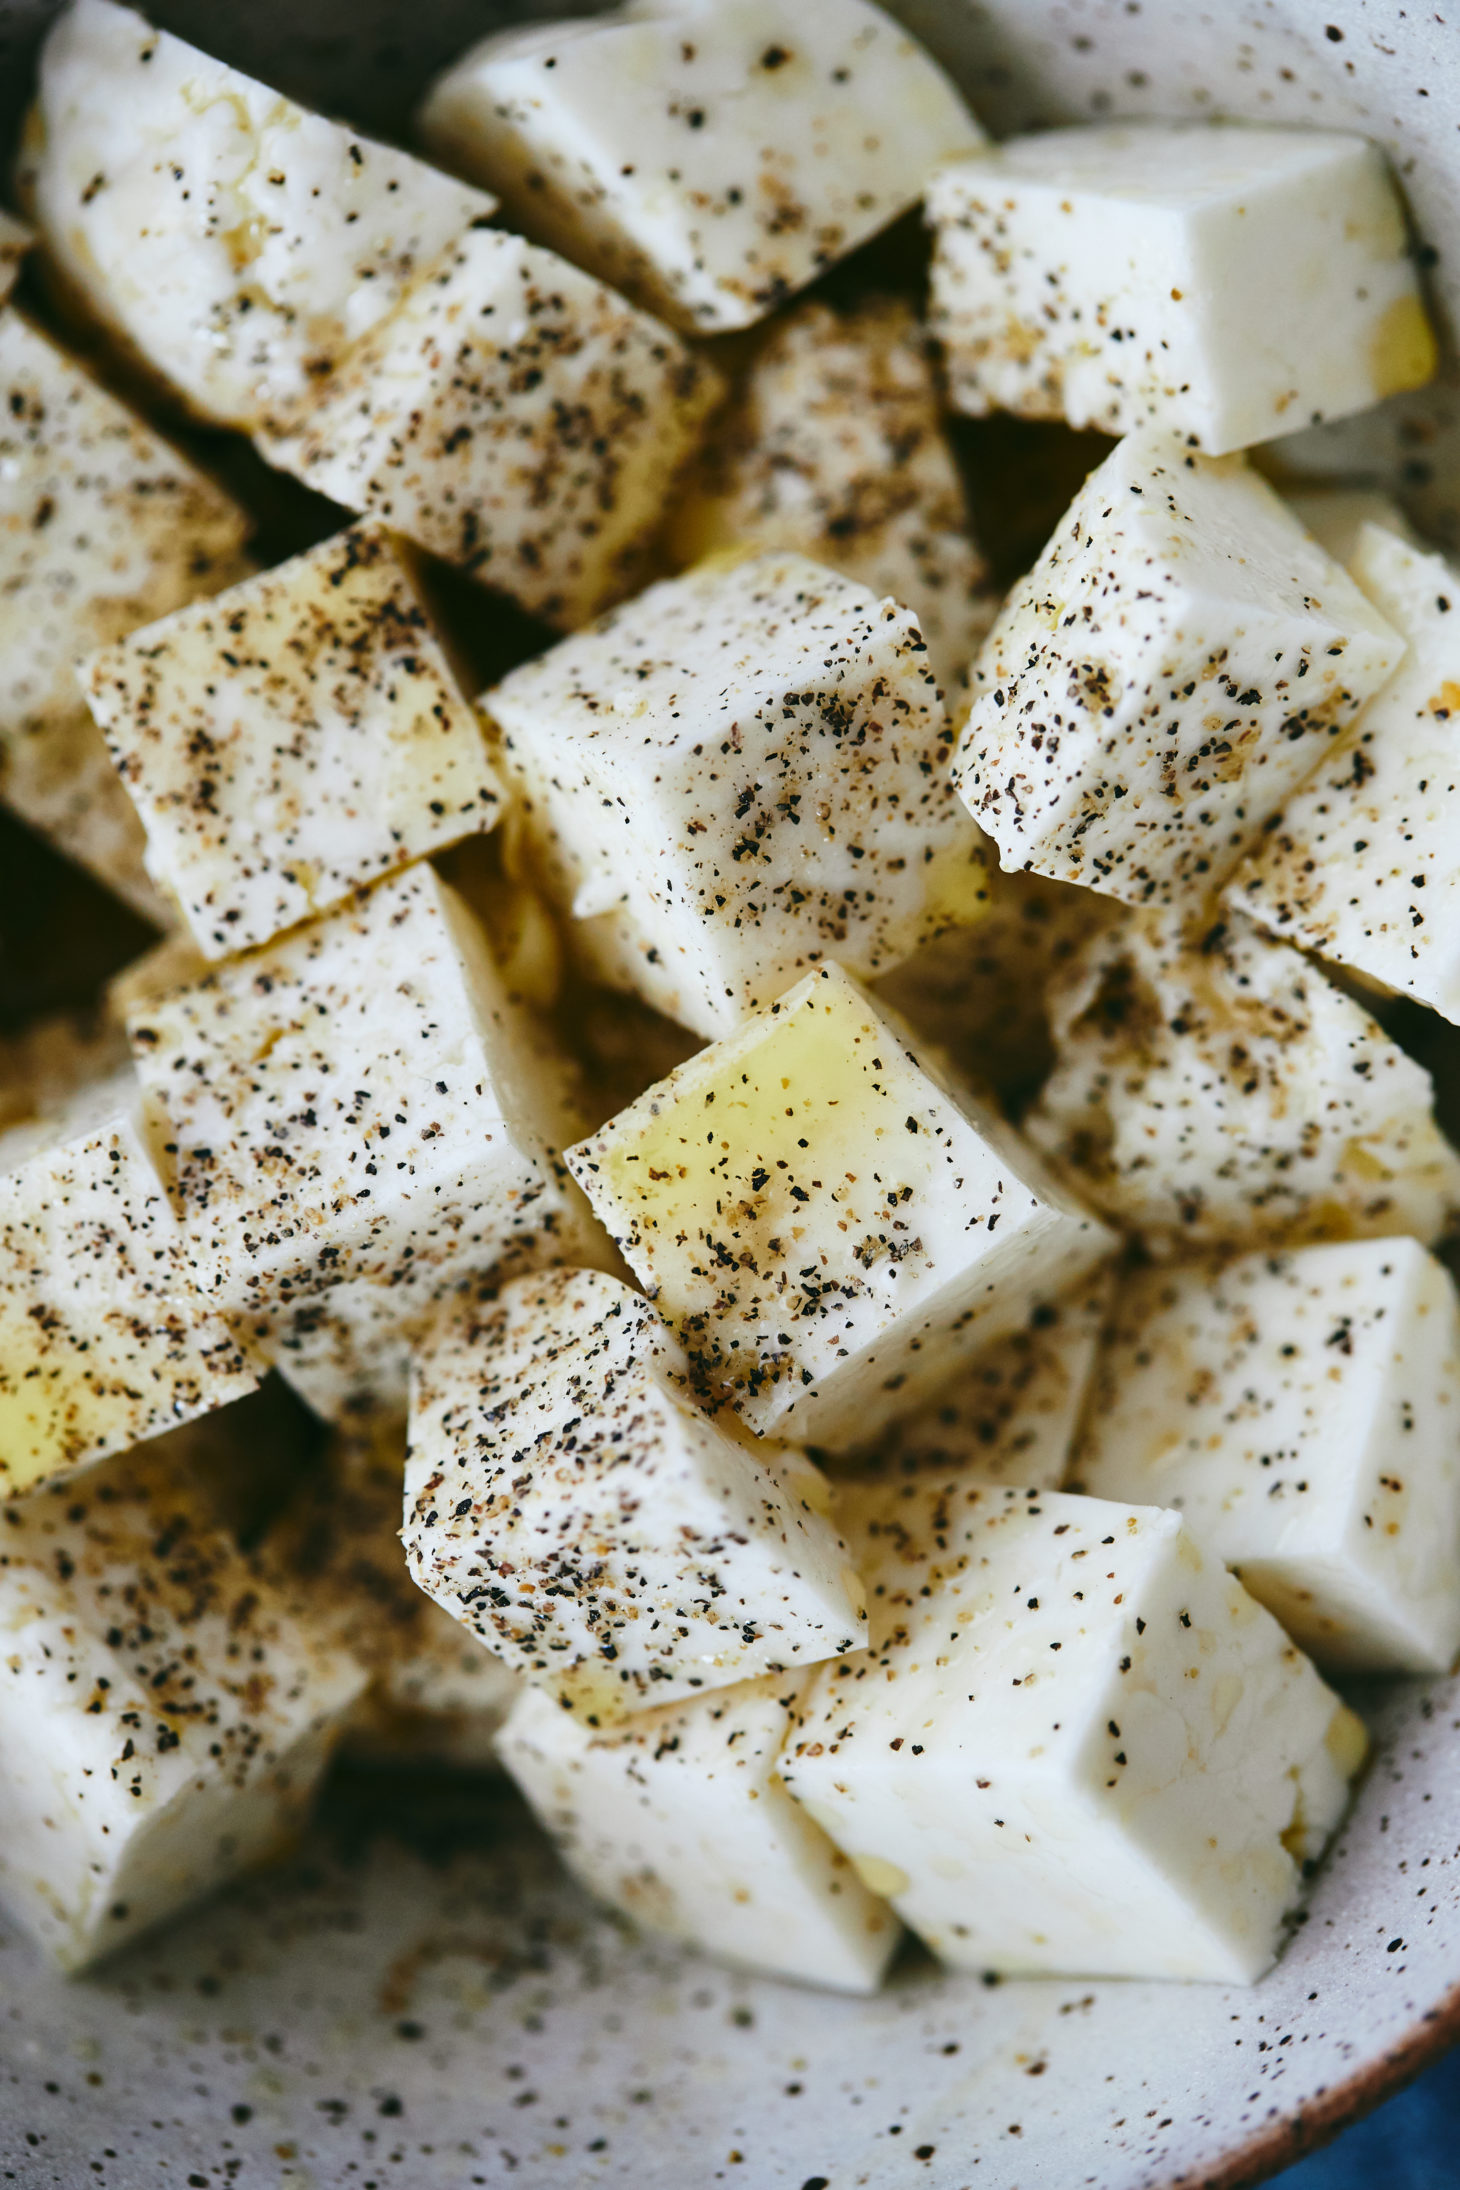 Cubed halloumi with olive oil, salt, and pepper